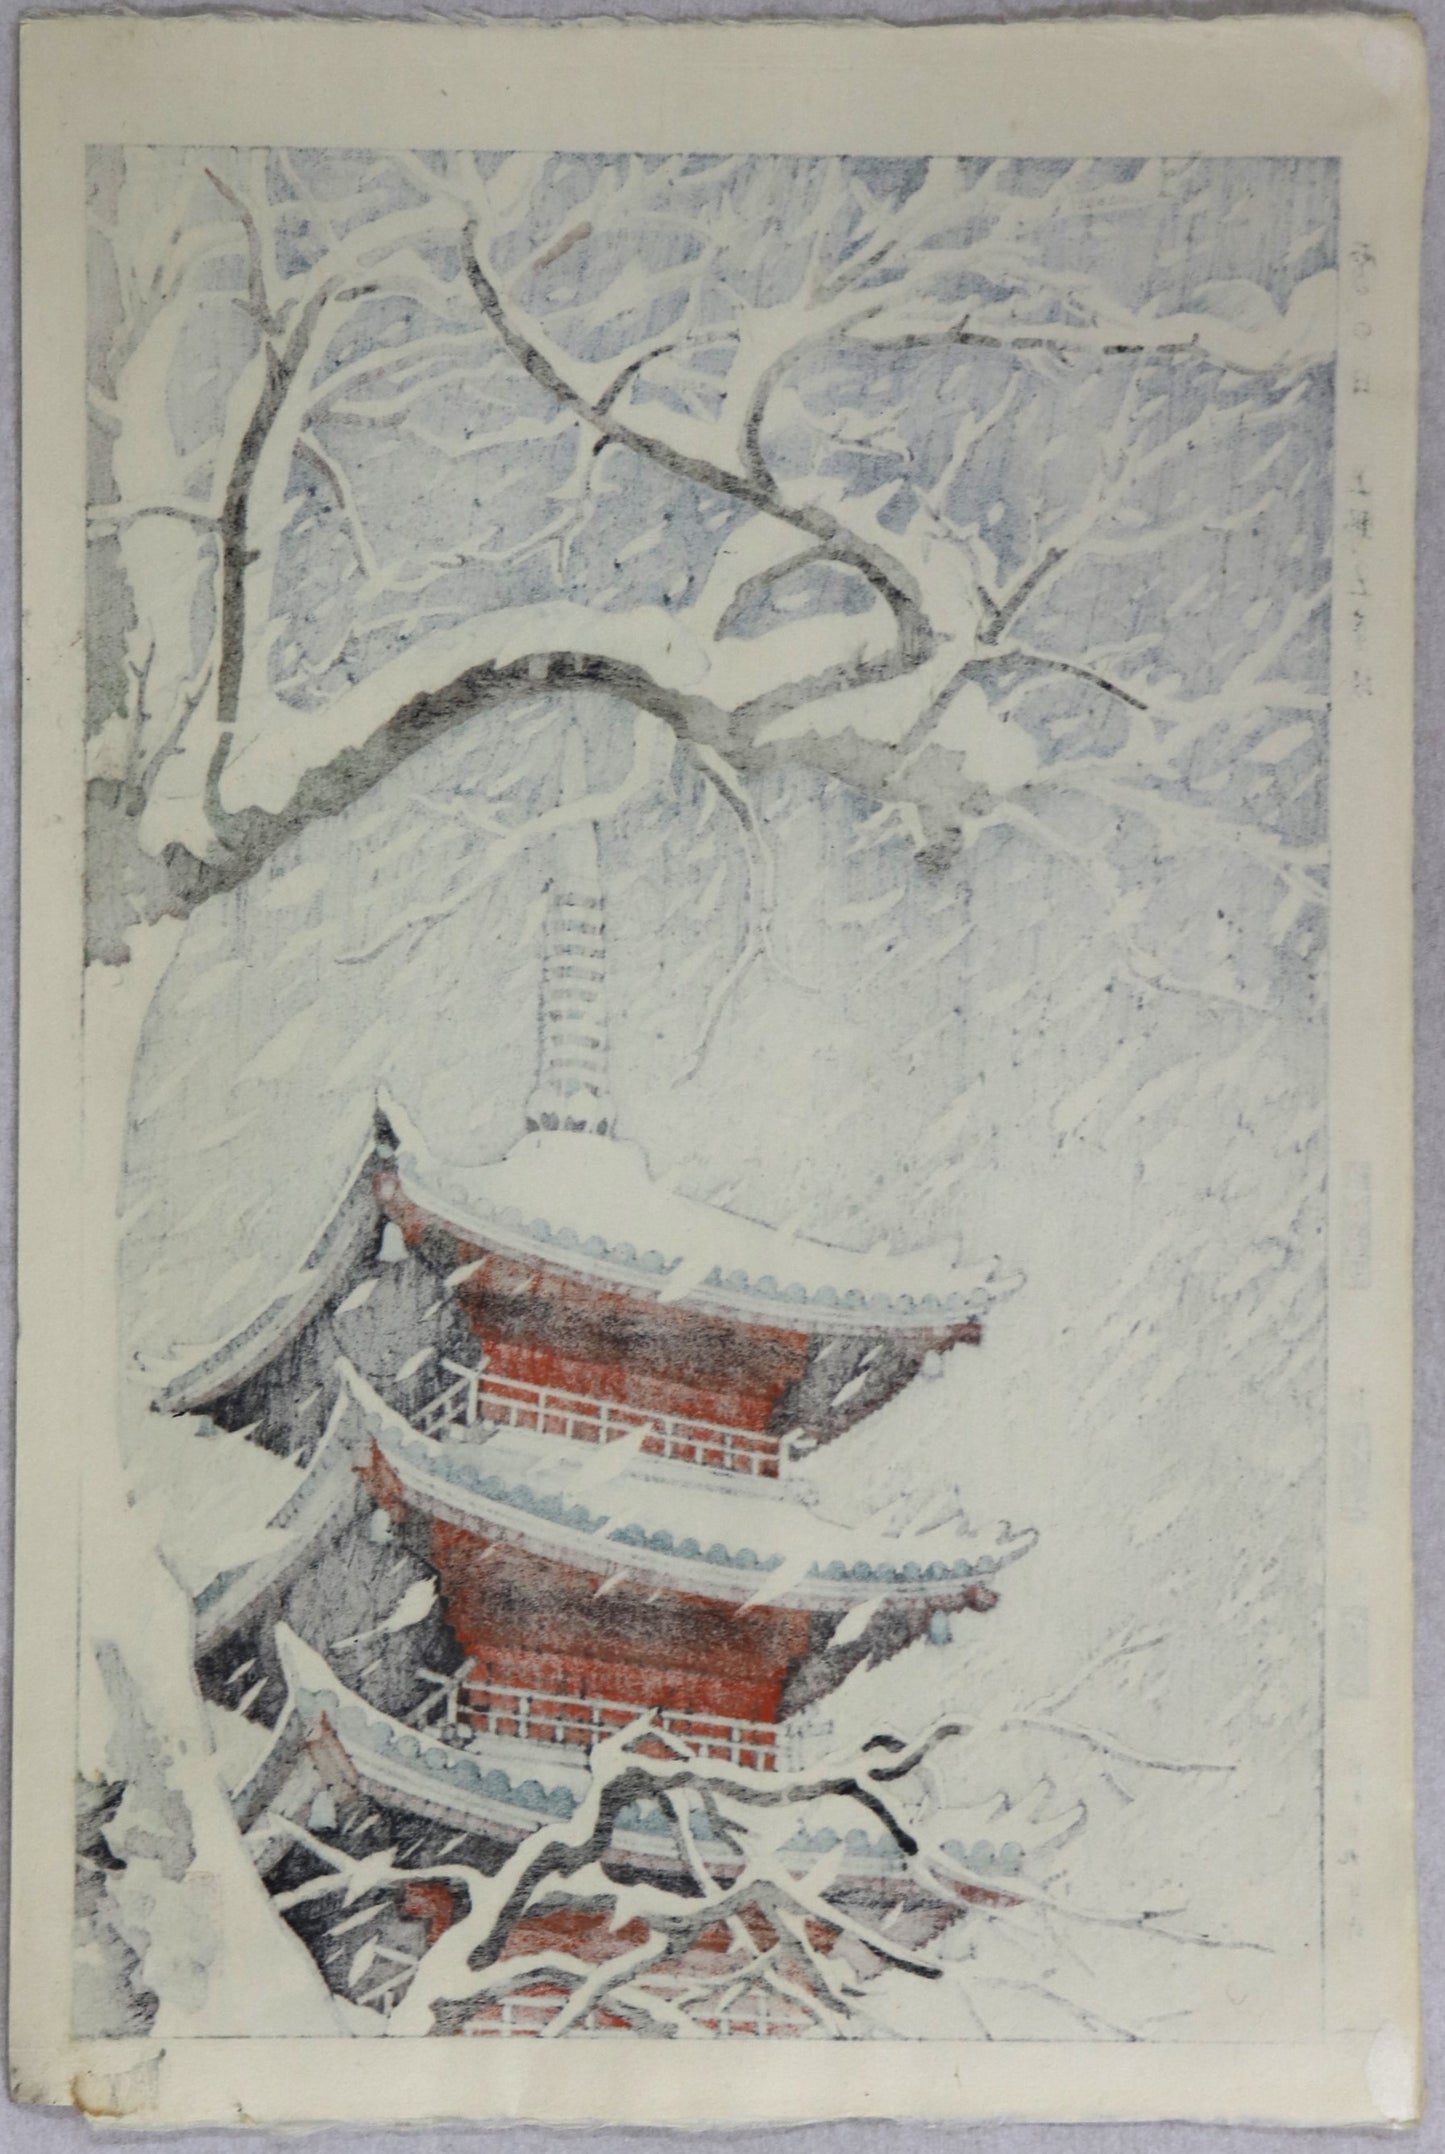 Snowy day at the five story Pagoda in Ueno by Takeda Shintaro / Jour neigeux sur la pagode à cinq étages de Ueno par Takeda Shintaro ( 1954)